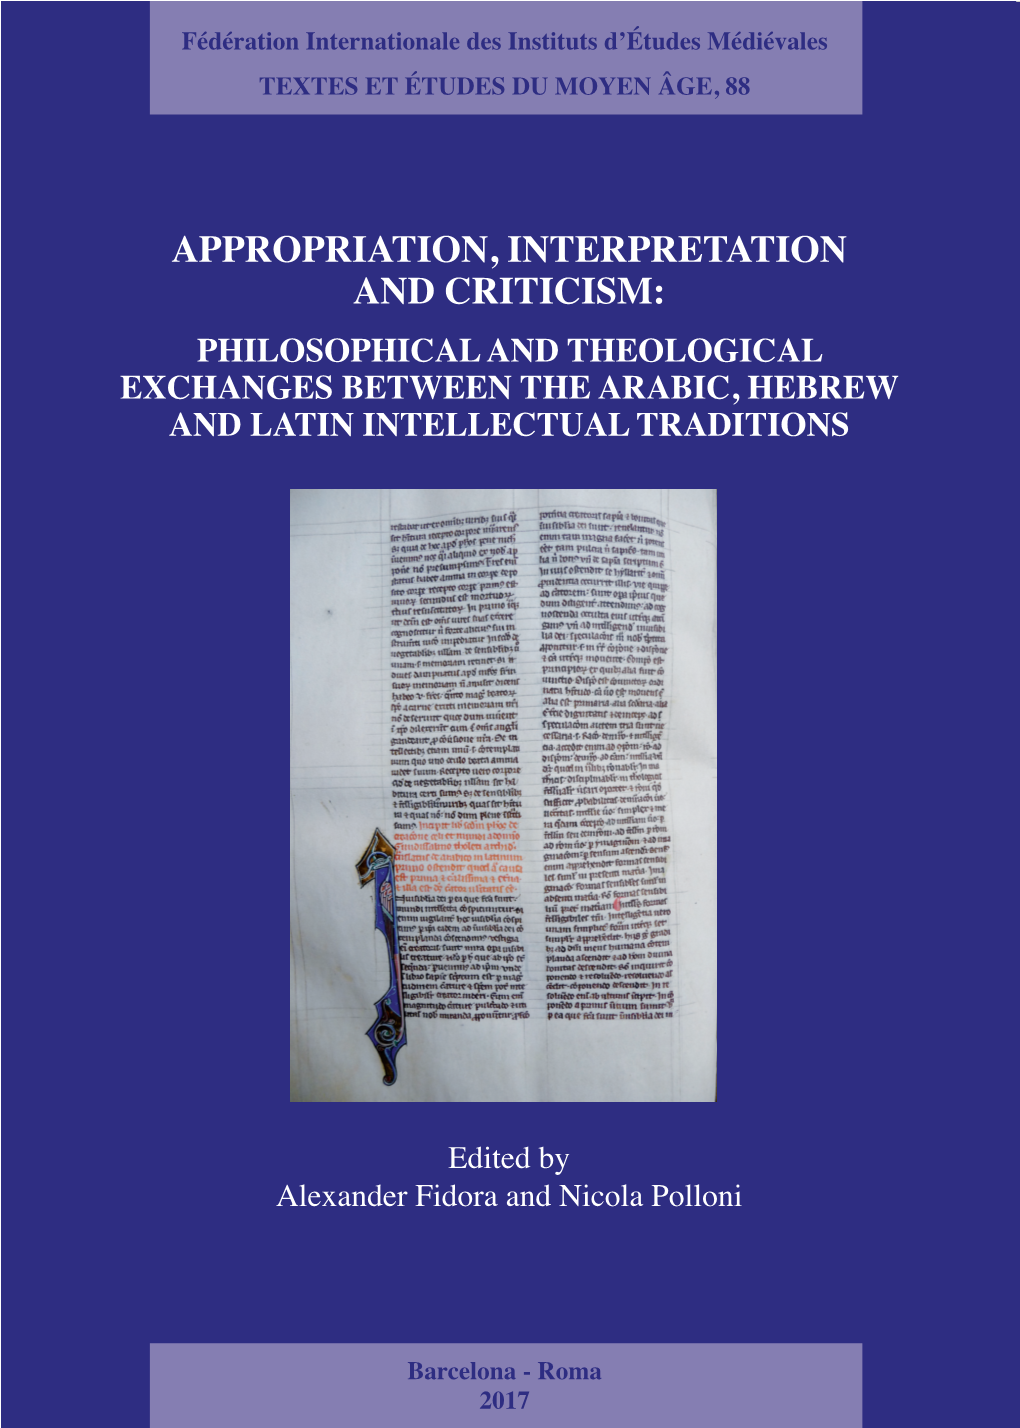 Appropriation, Interpretation and Criticism: Philosophical and Theological Exchanges Between the Arabic, Hebrew and Latin Intellectual Traditions